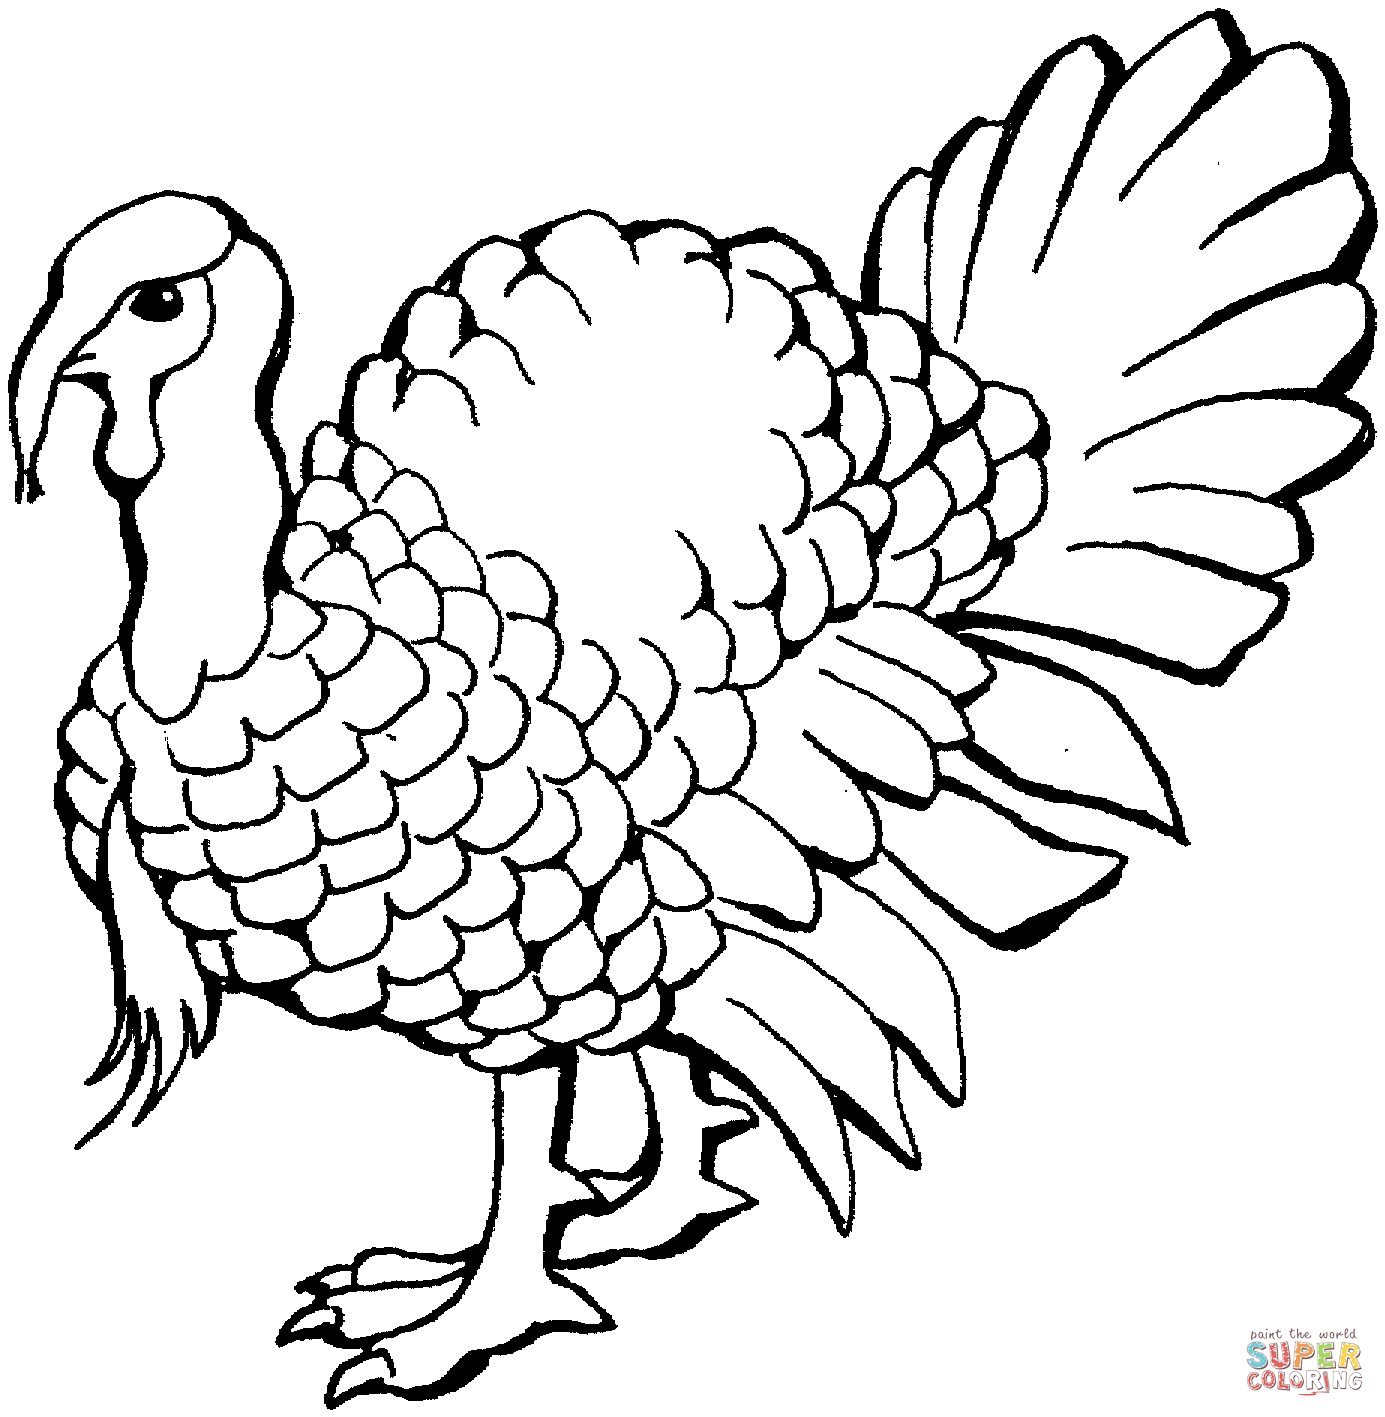 free-turkey-outline-download-free-turkey-outline-png-images-free